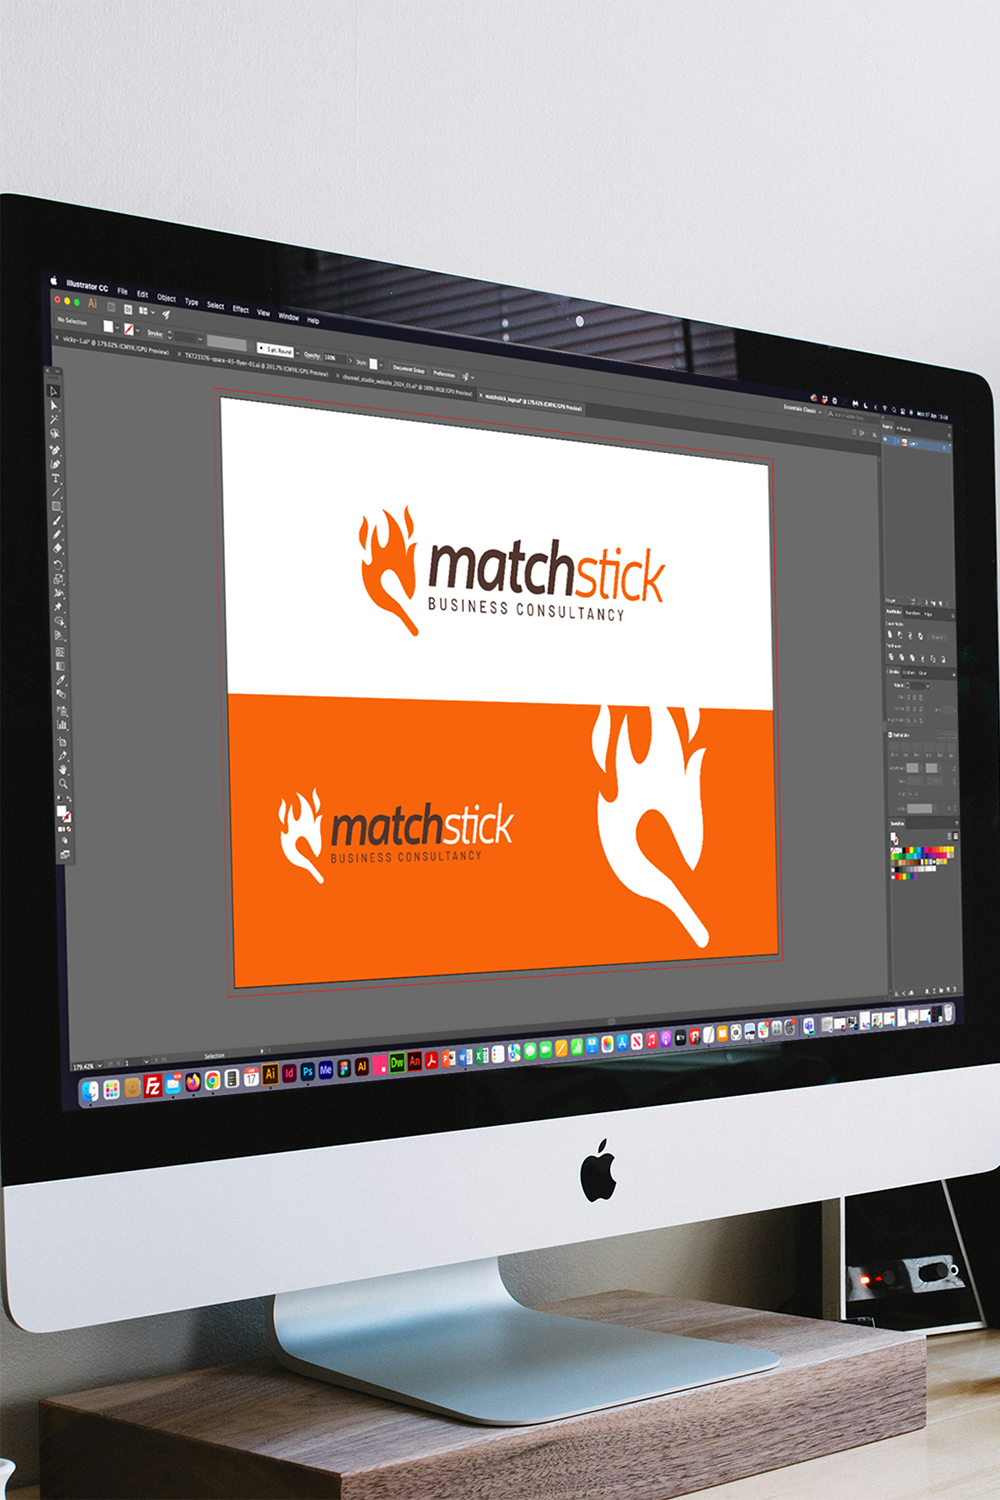 Image of a logo design on a computer screen